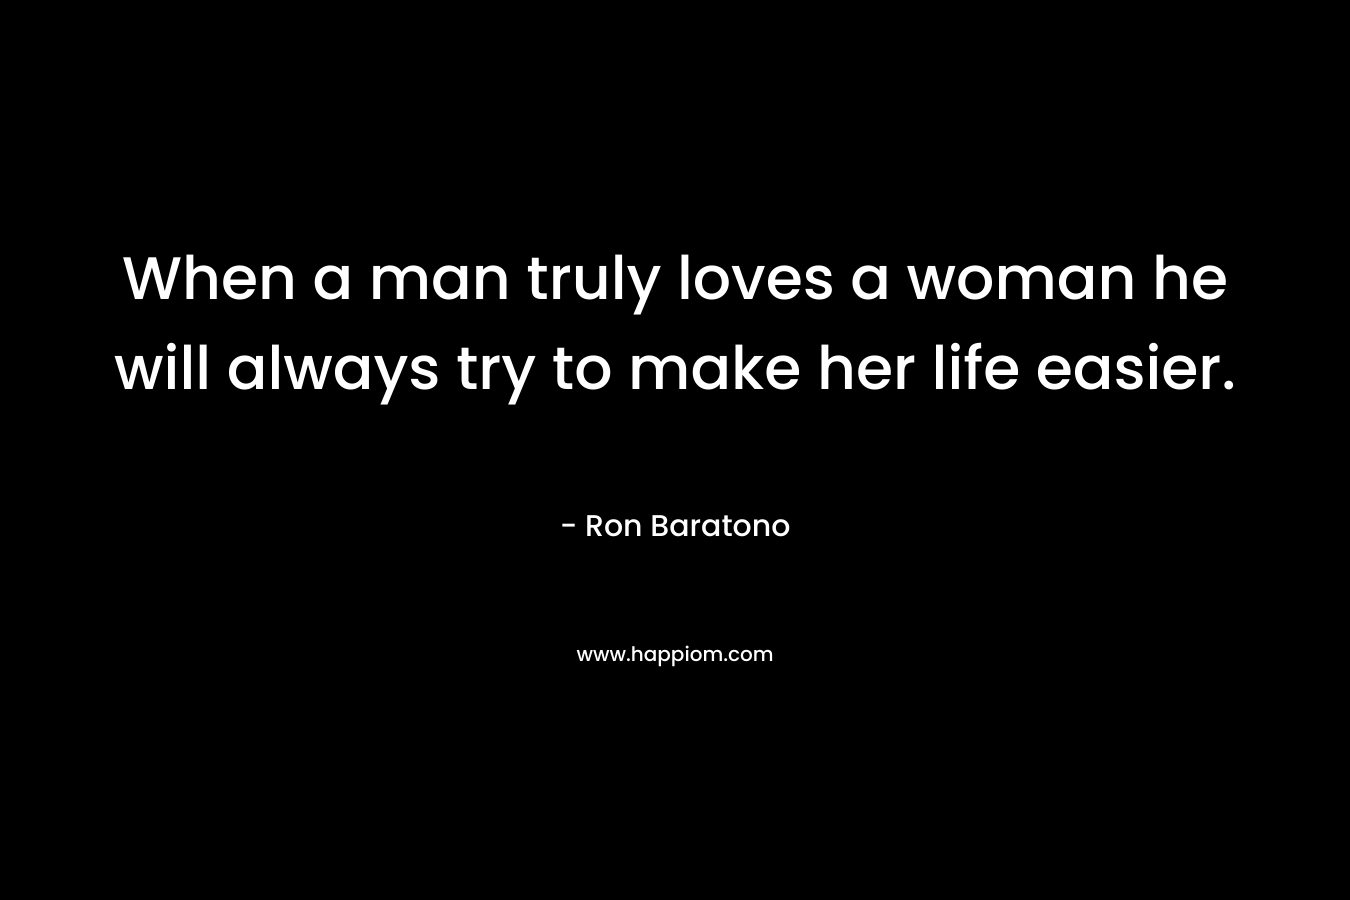 When a man truly loves a woman he will always try to make her life easier.